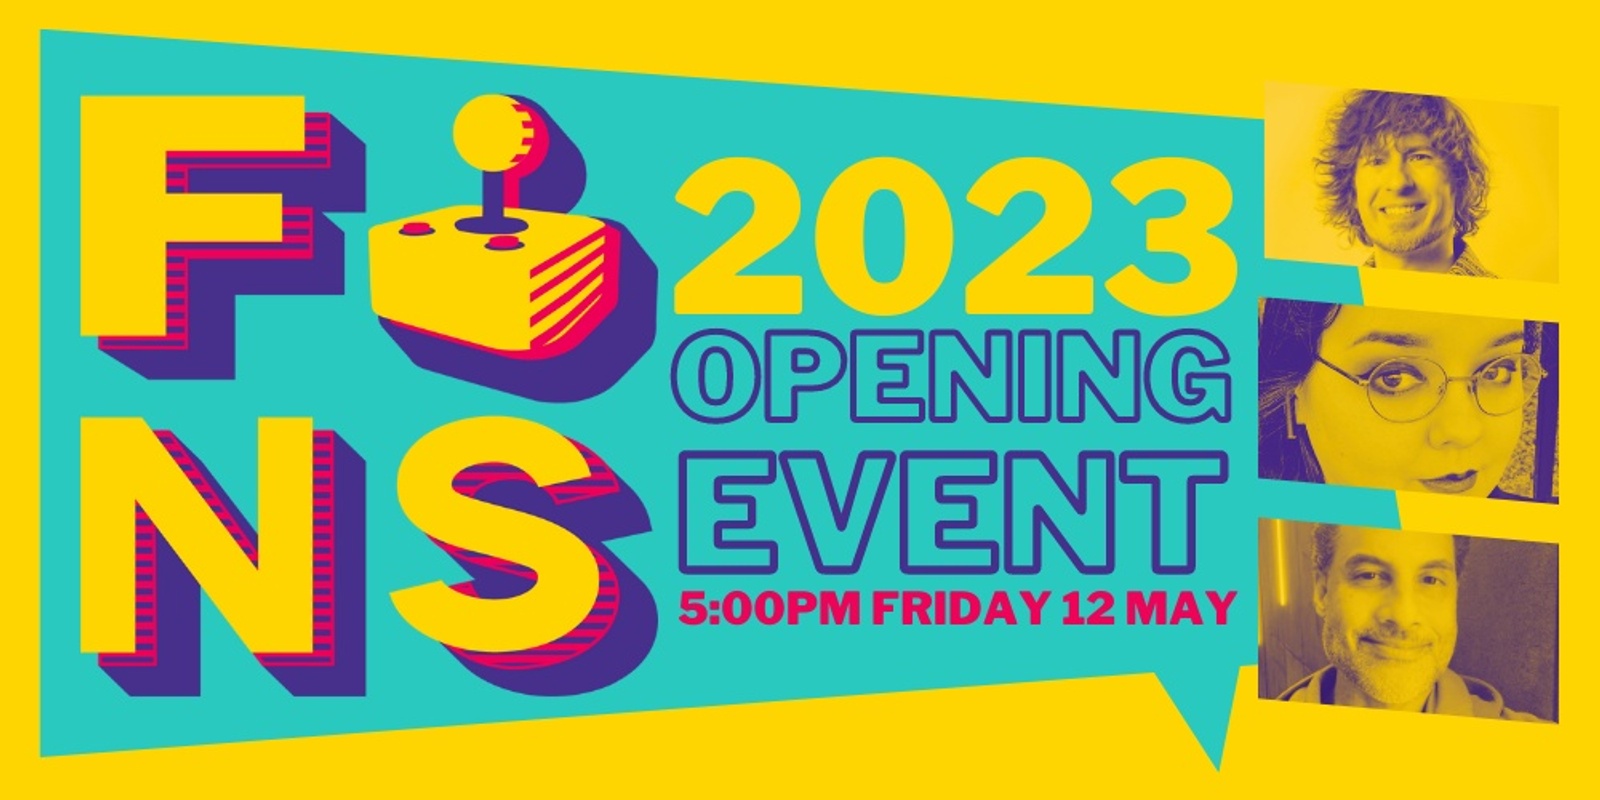 FINS 2023 OPENING EVENT